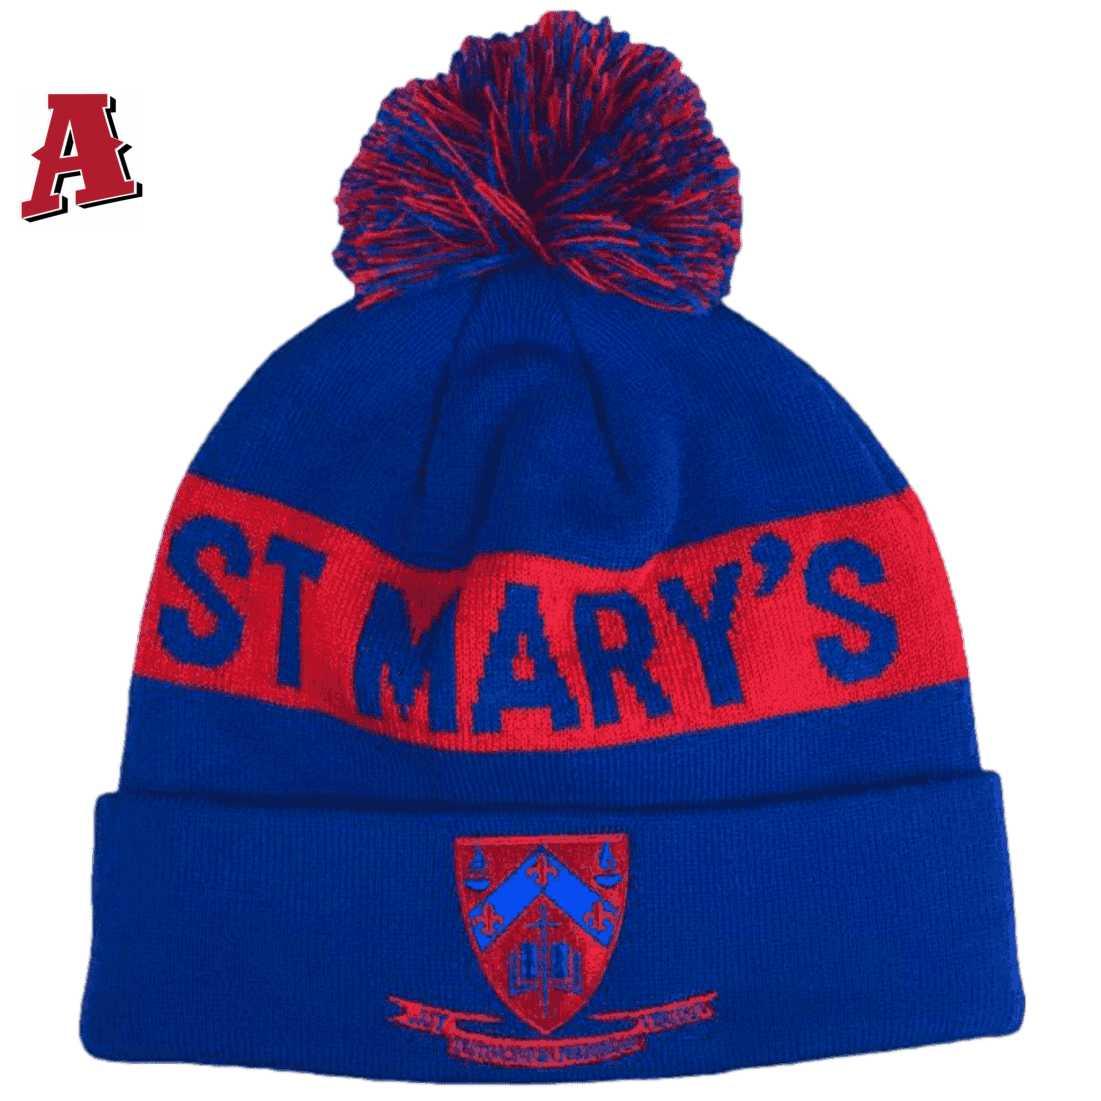 St Marys College Parkville Vic Aussie Custom Acrylic Beanie with Pom Pom and Optional Plain or Rib Cuff Royal Blue Red